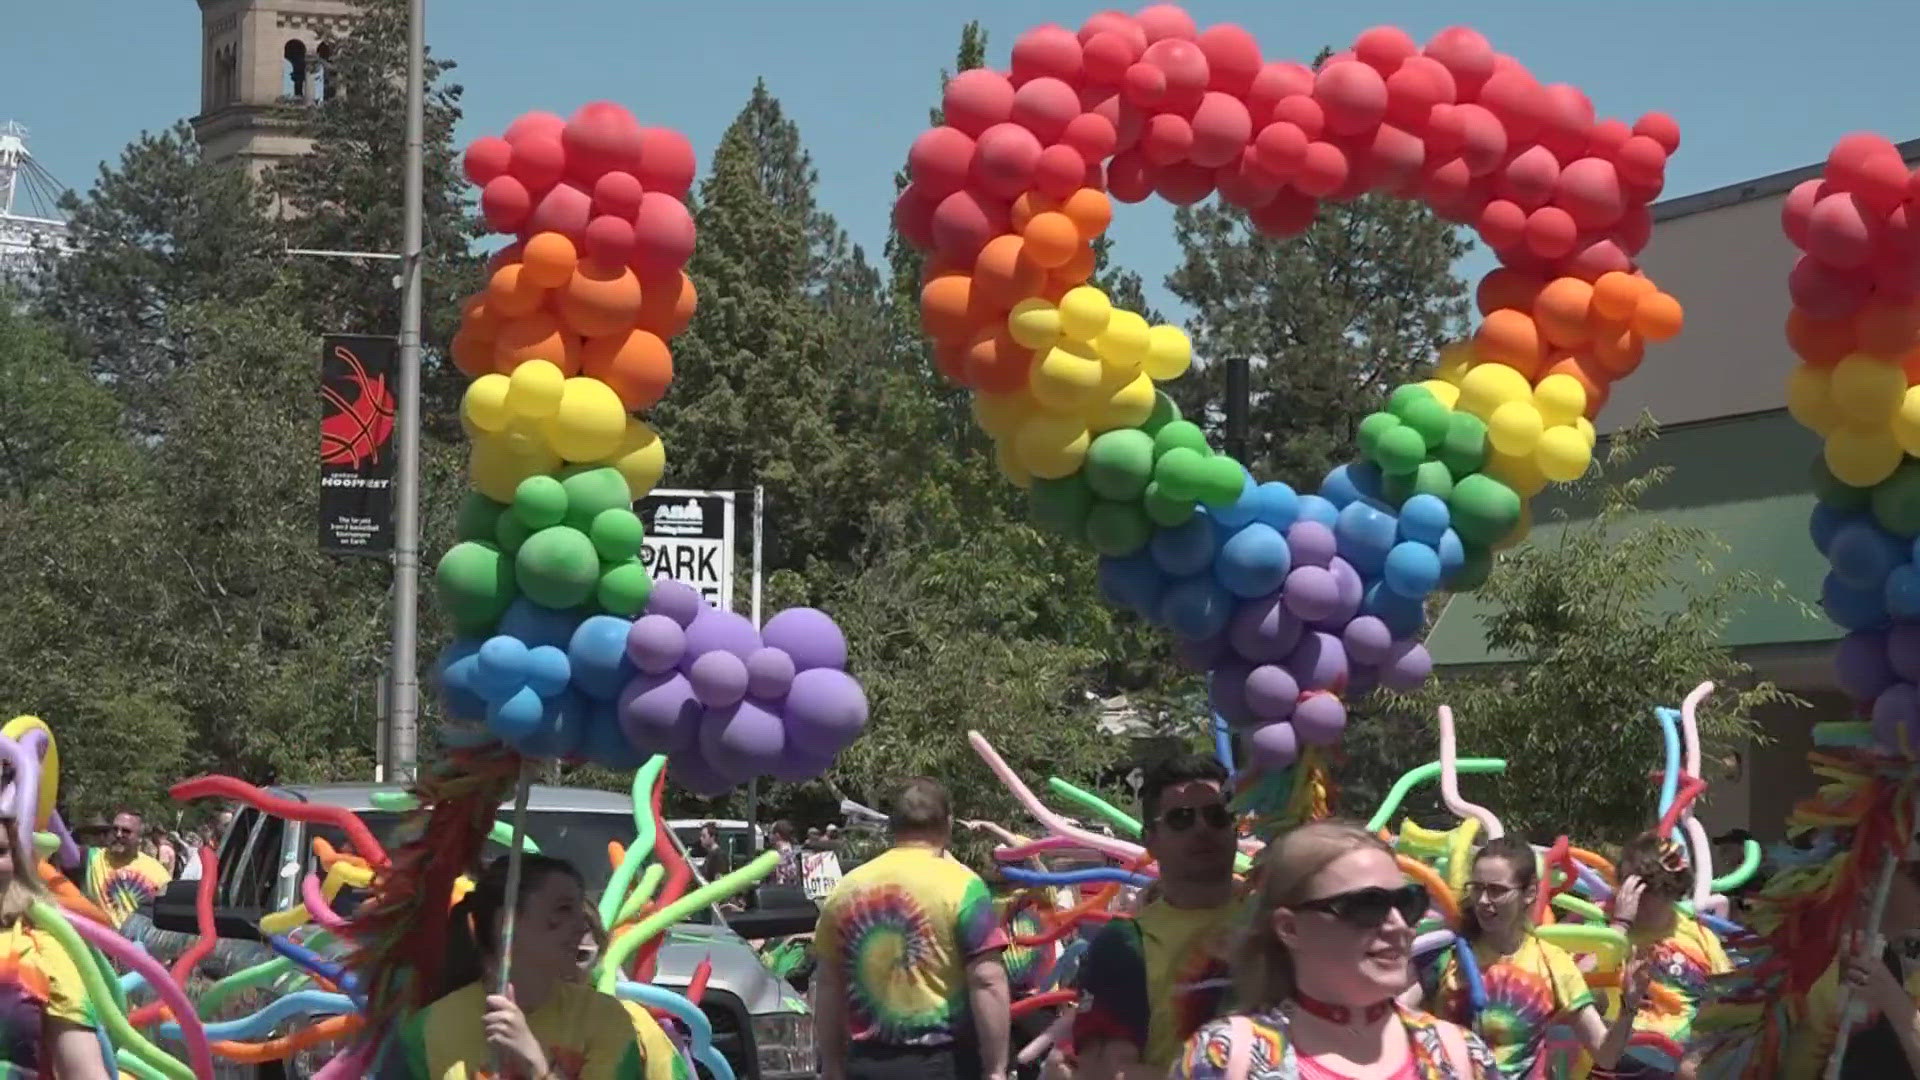 50,000 people flocked to downtown Spokane for the annual Pride Parade